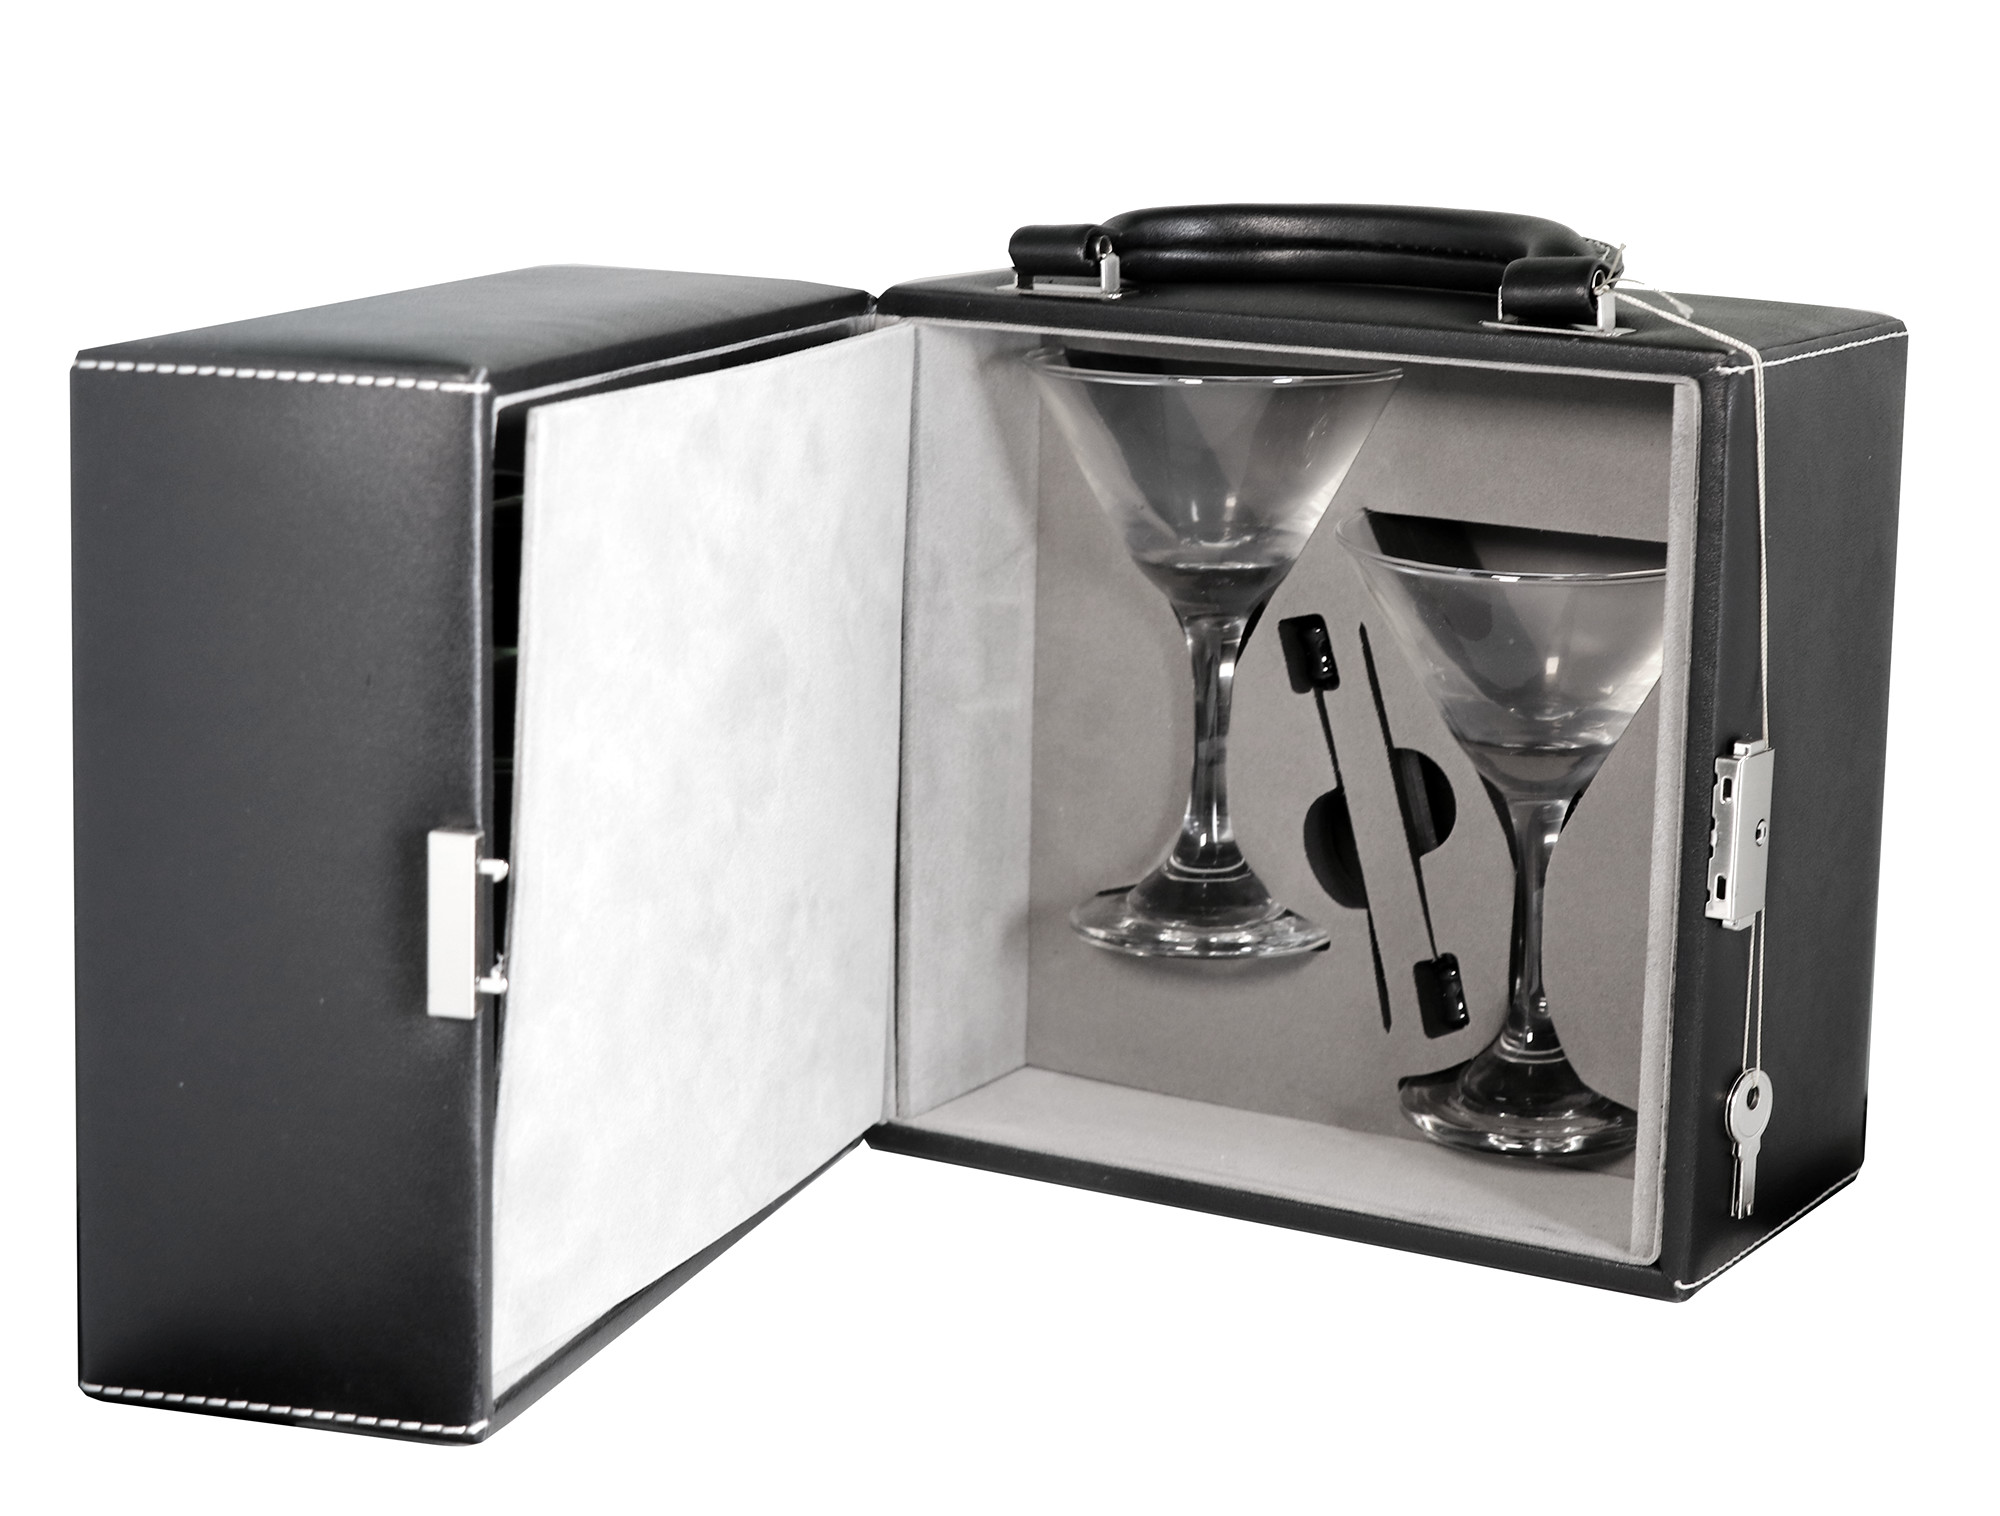 His & Hers Stainless Steel Martini Bar Glass Set with Hard Carry